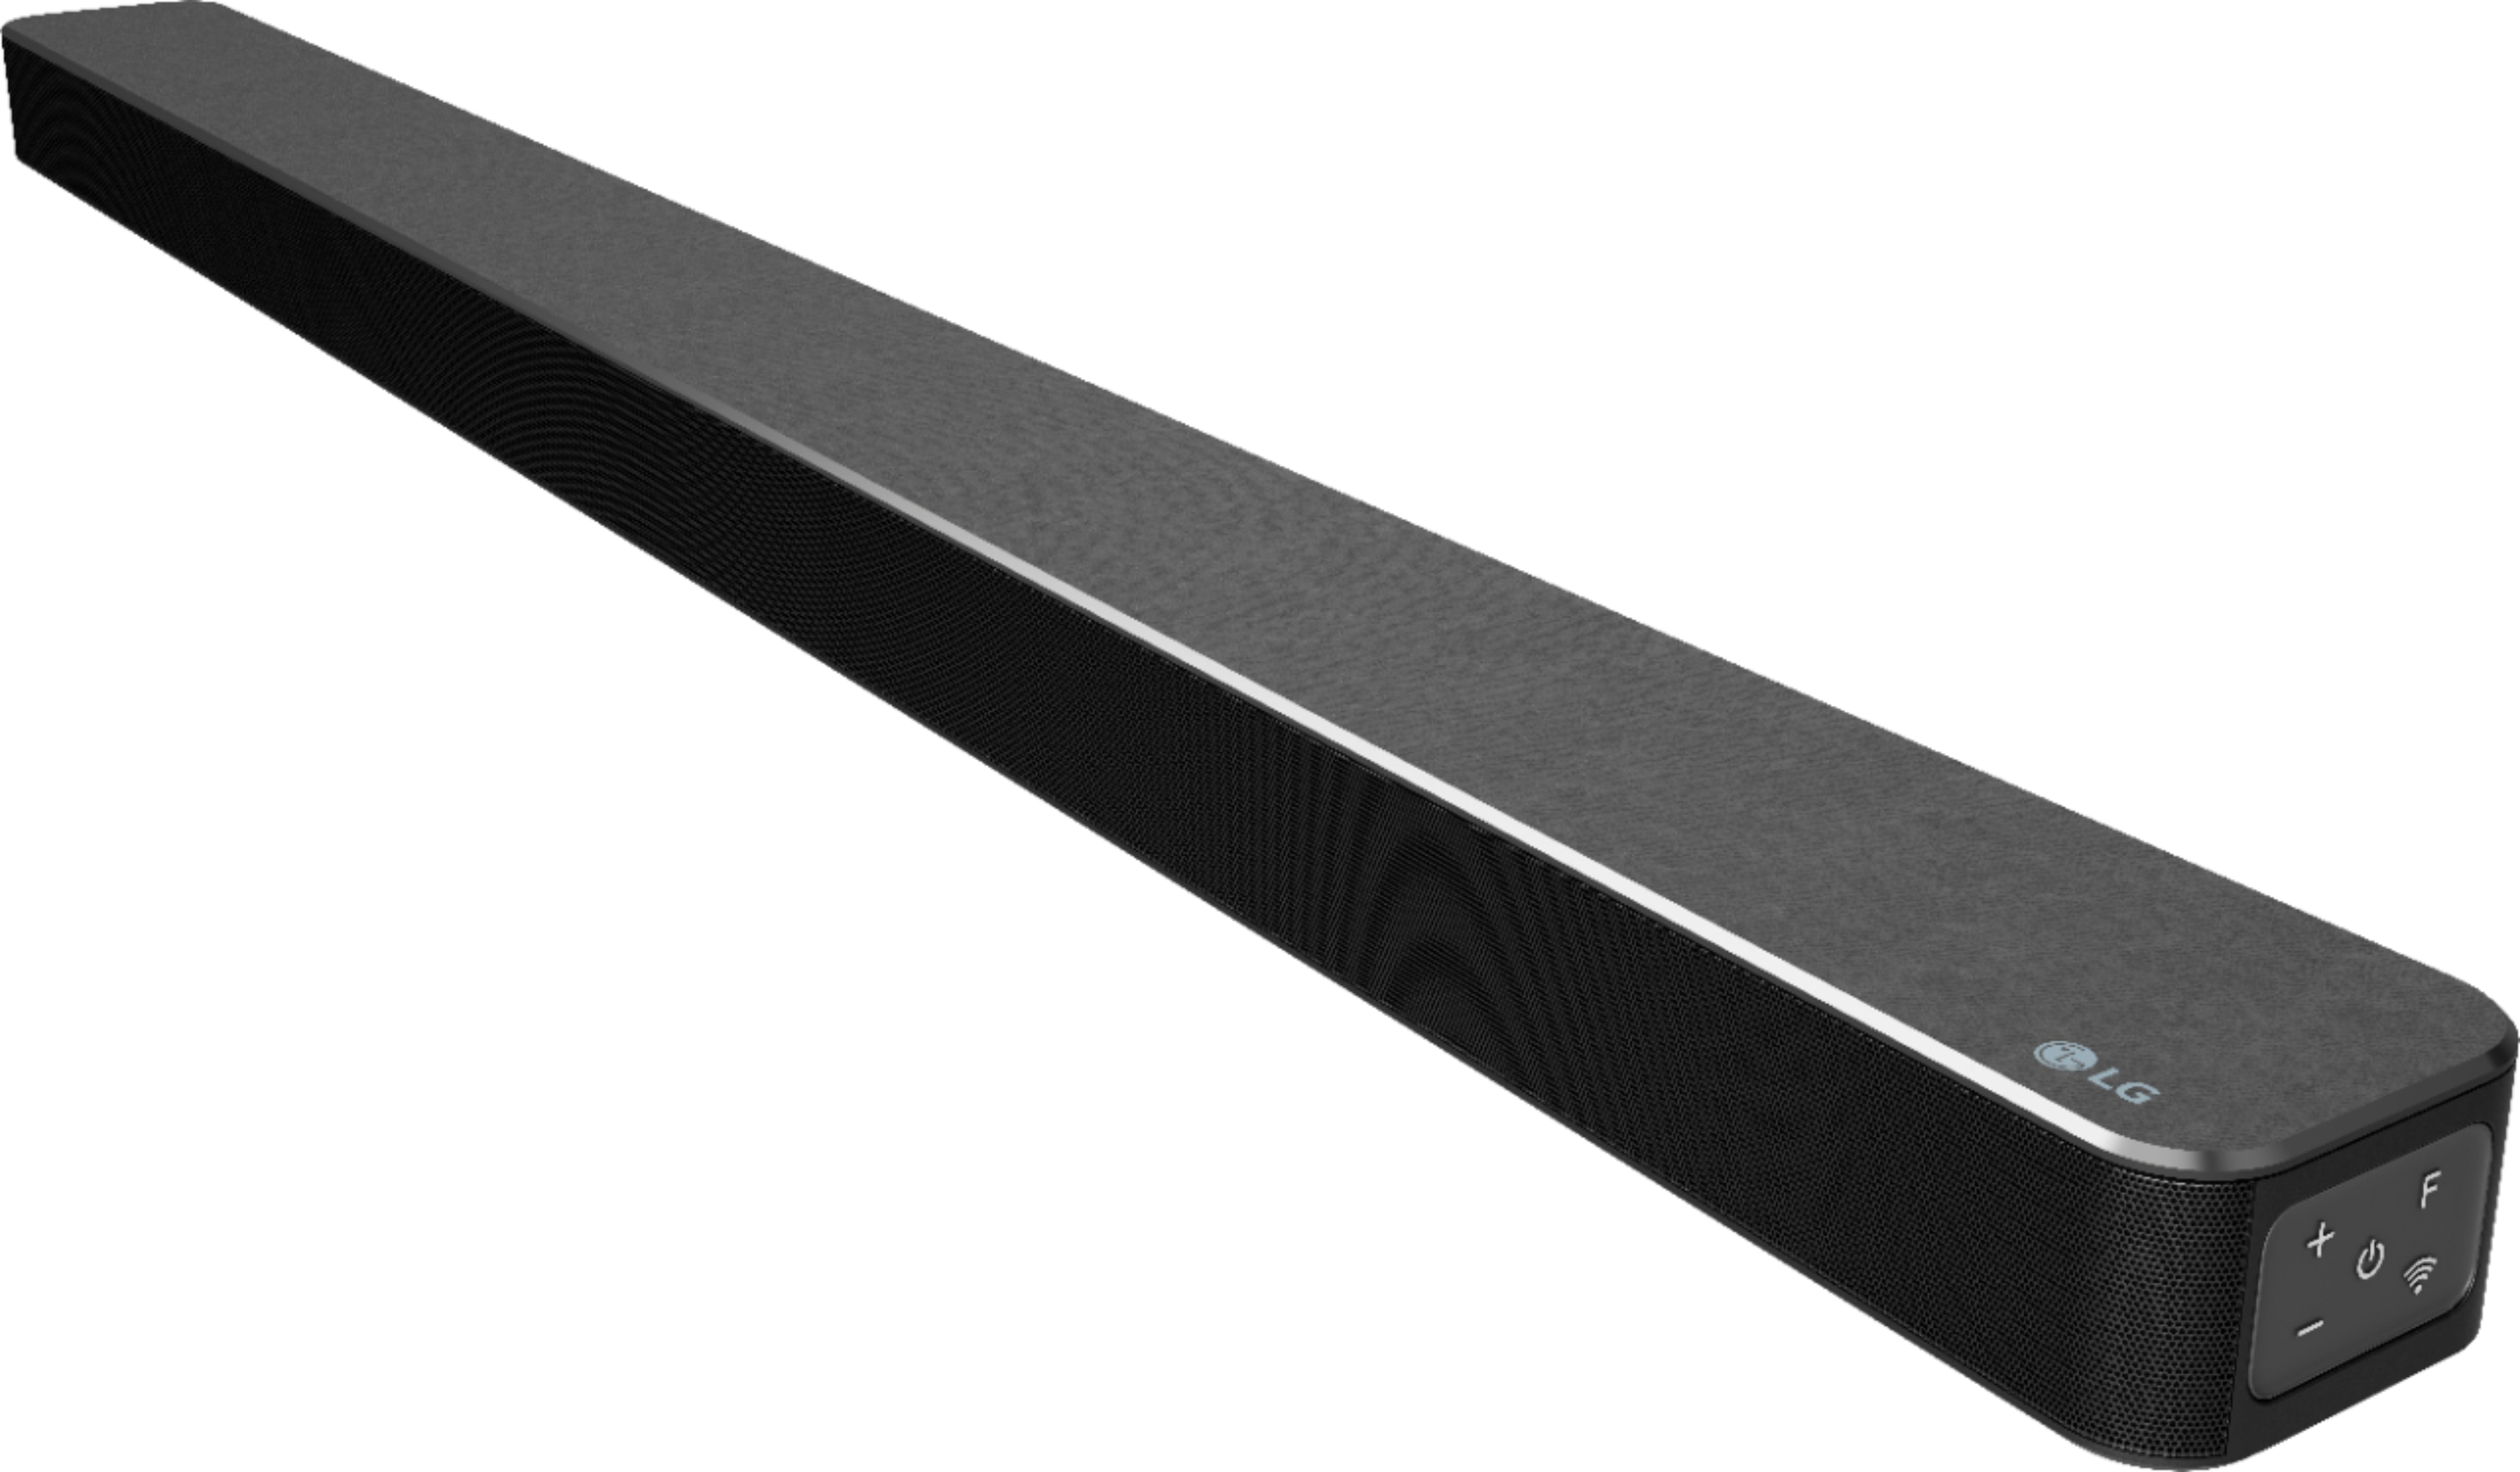 Best Buy: LG 3.1-Channel 420W Soundbar with Wireless Subwoofer and DTS  Virtual:X Black LG SN6Y